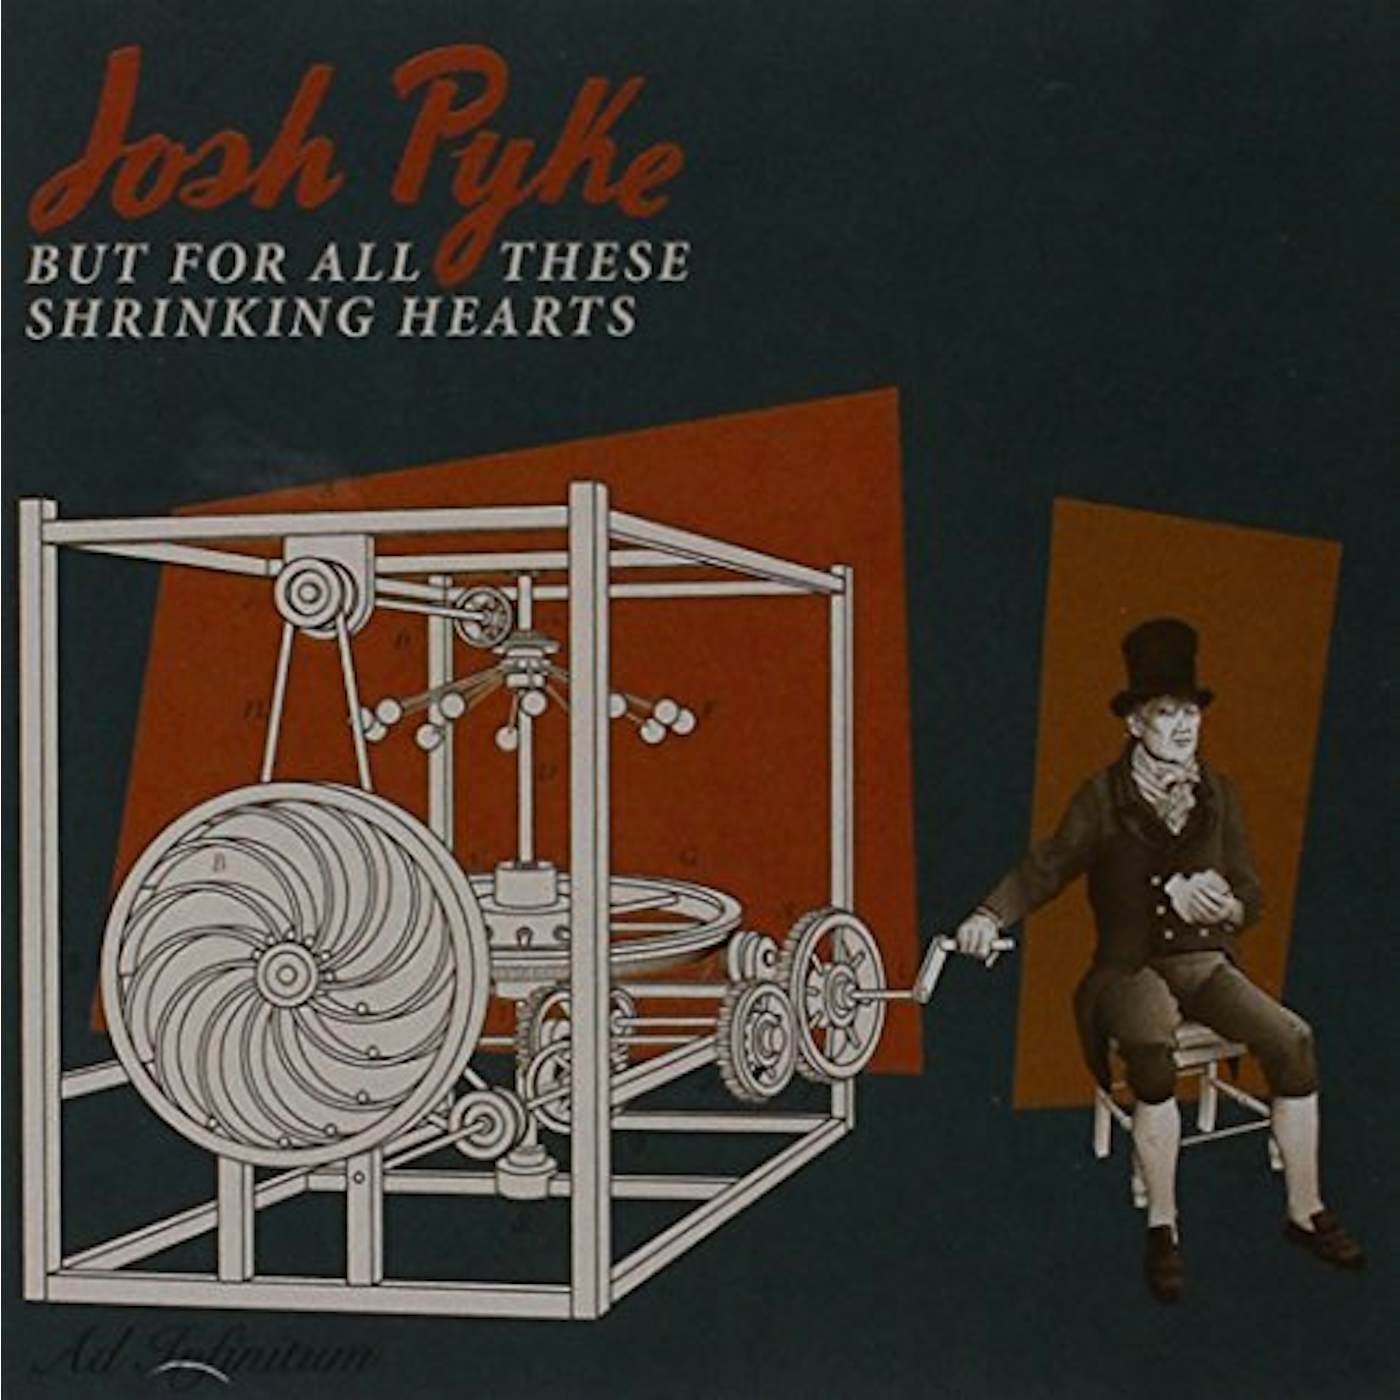 Josh Pyke BUT FOR ALL THESE SHRINKING HEARTS CD